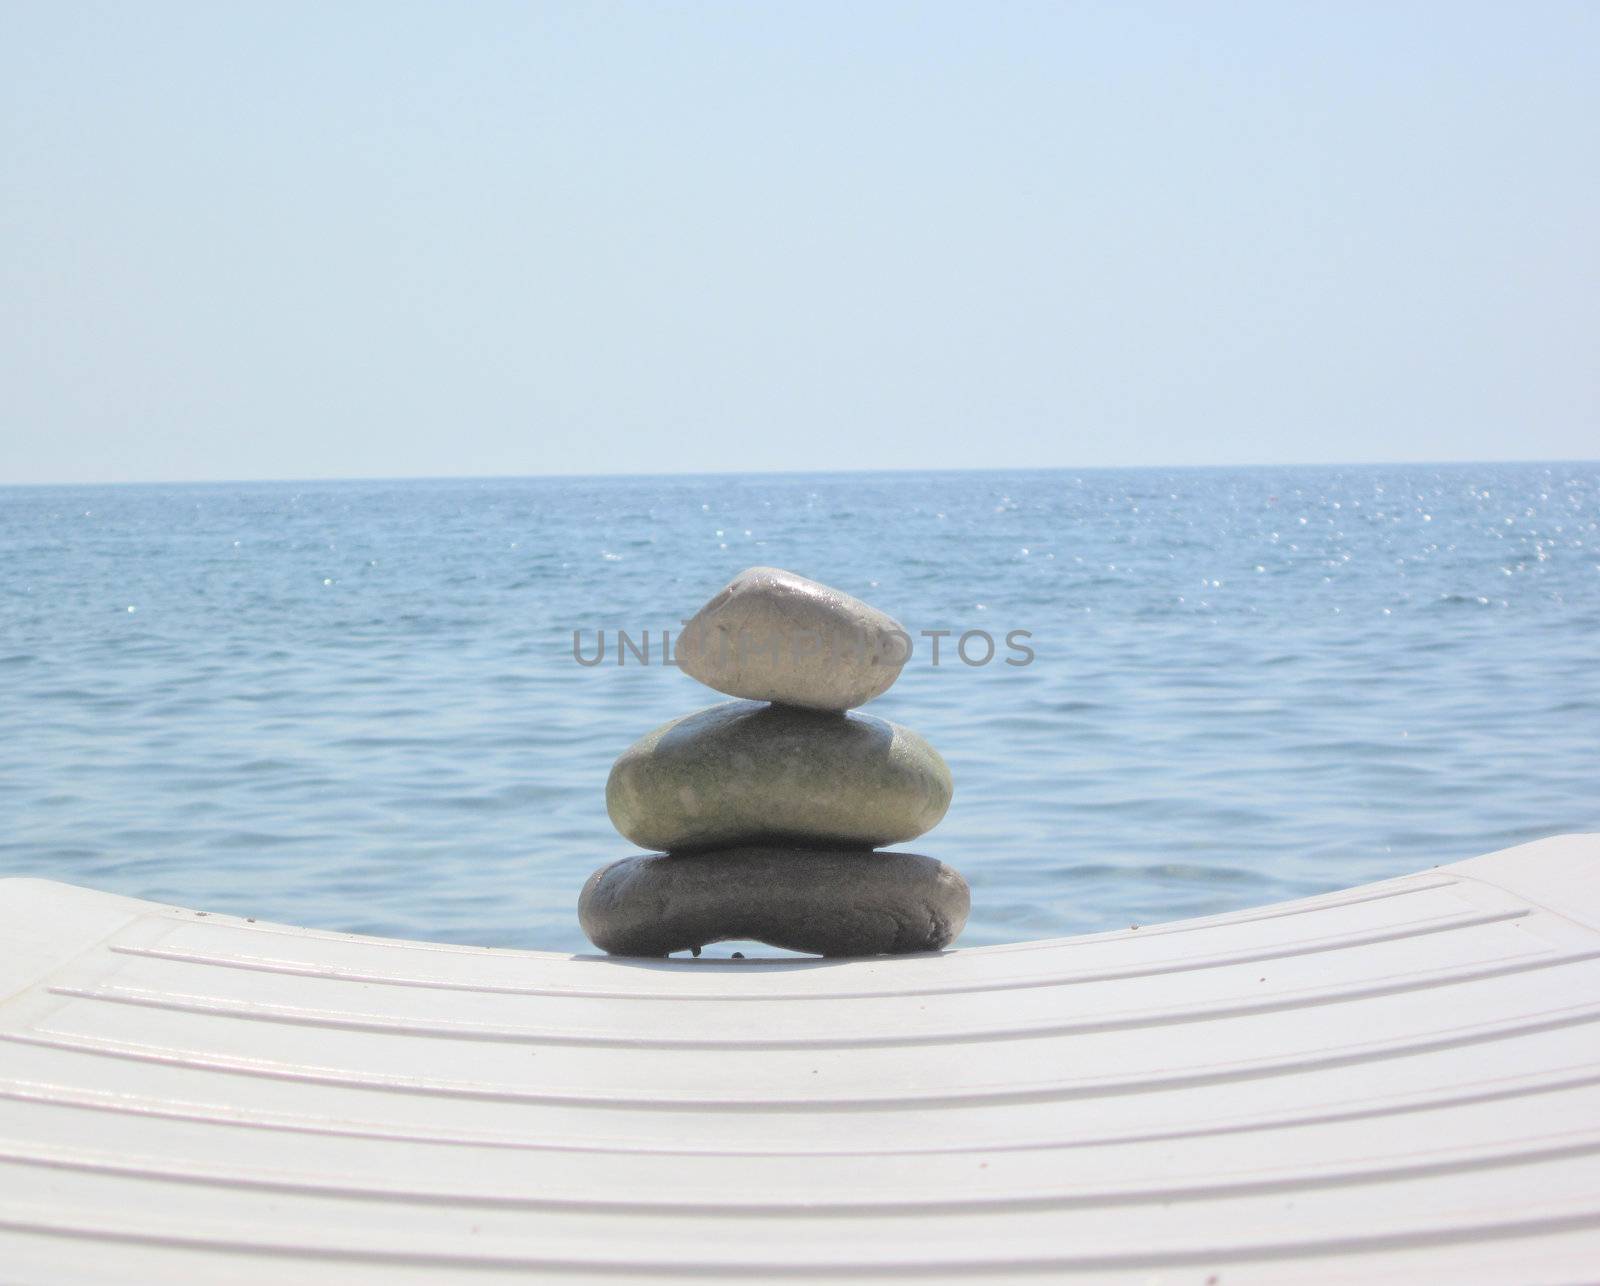 The stack of pebble stones in zen concept  on chaise longues  by svtrotof